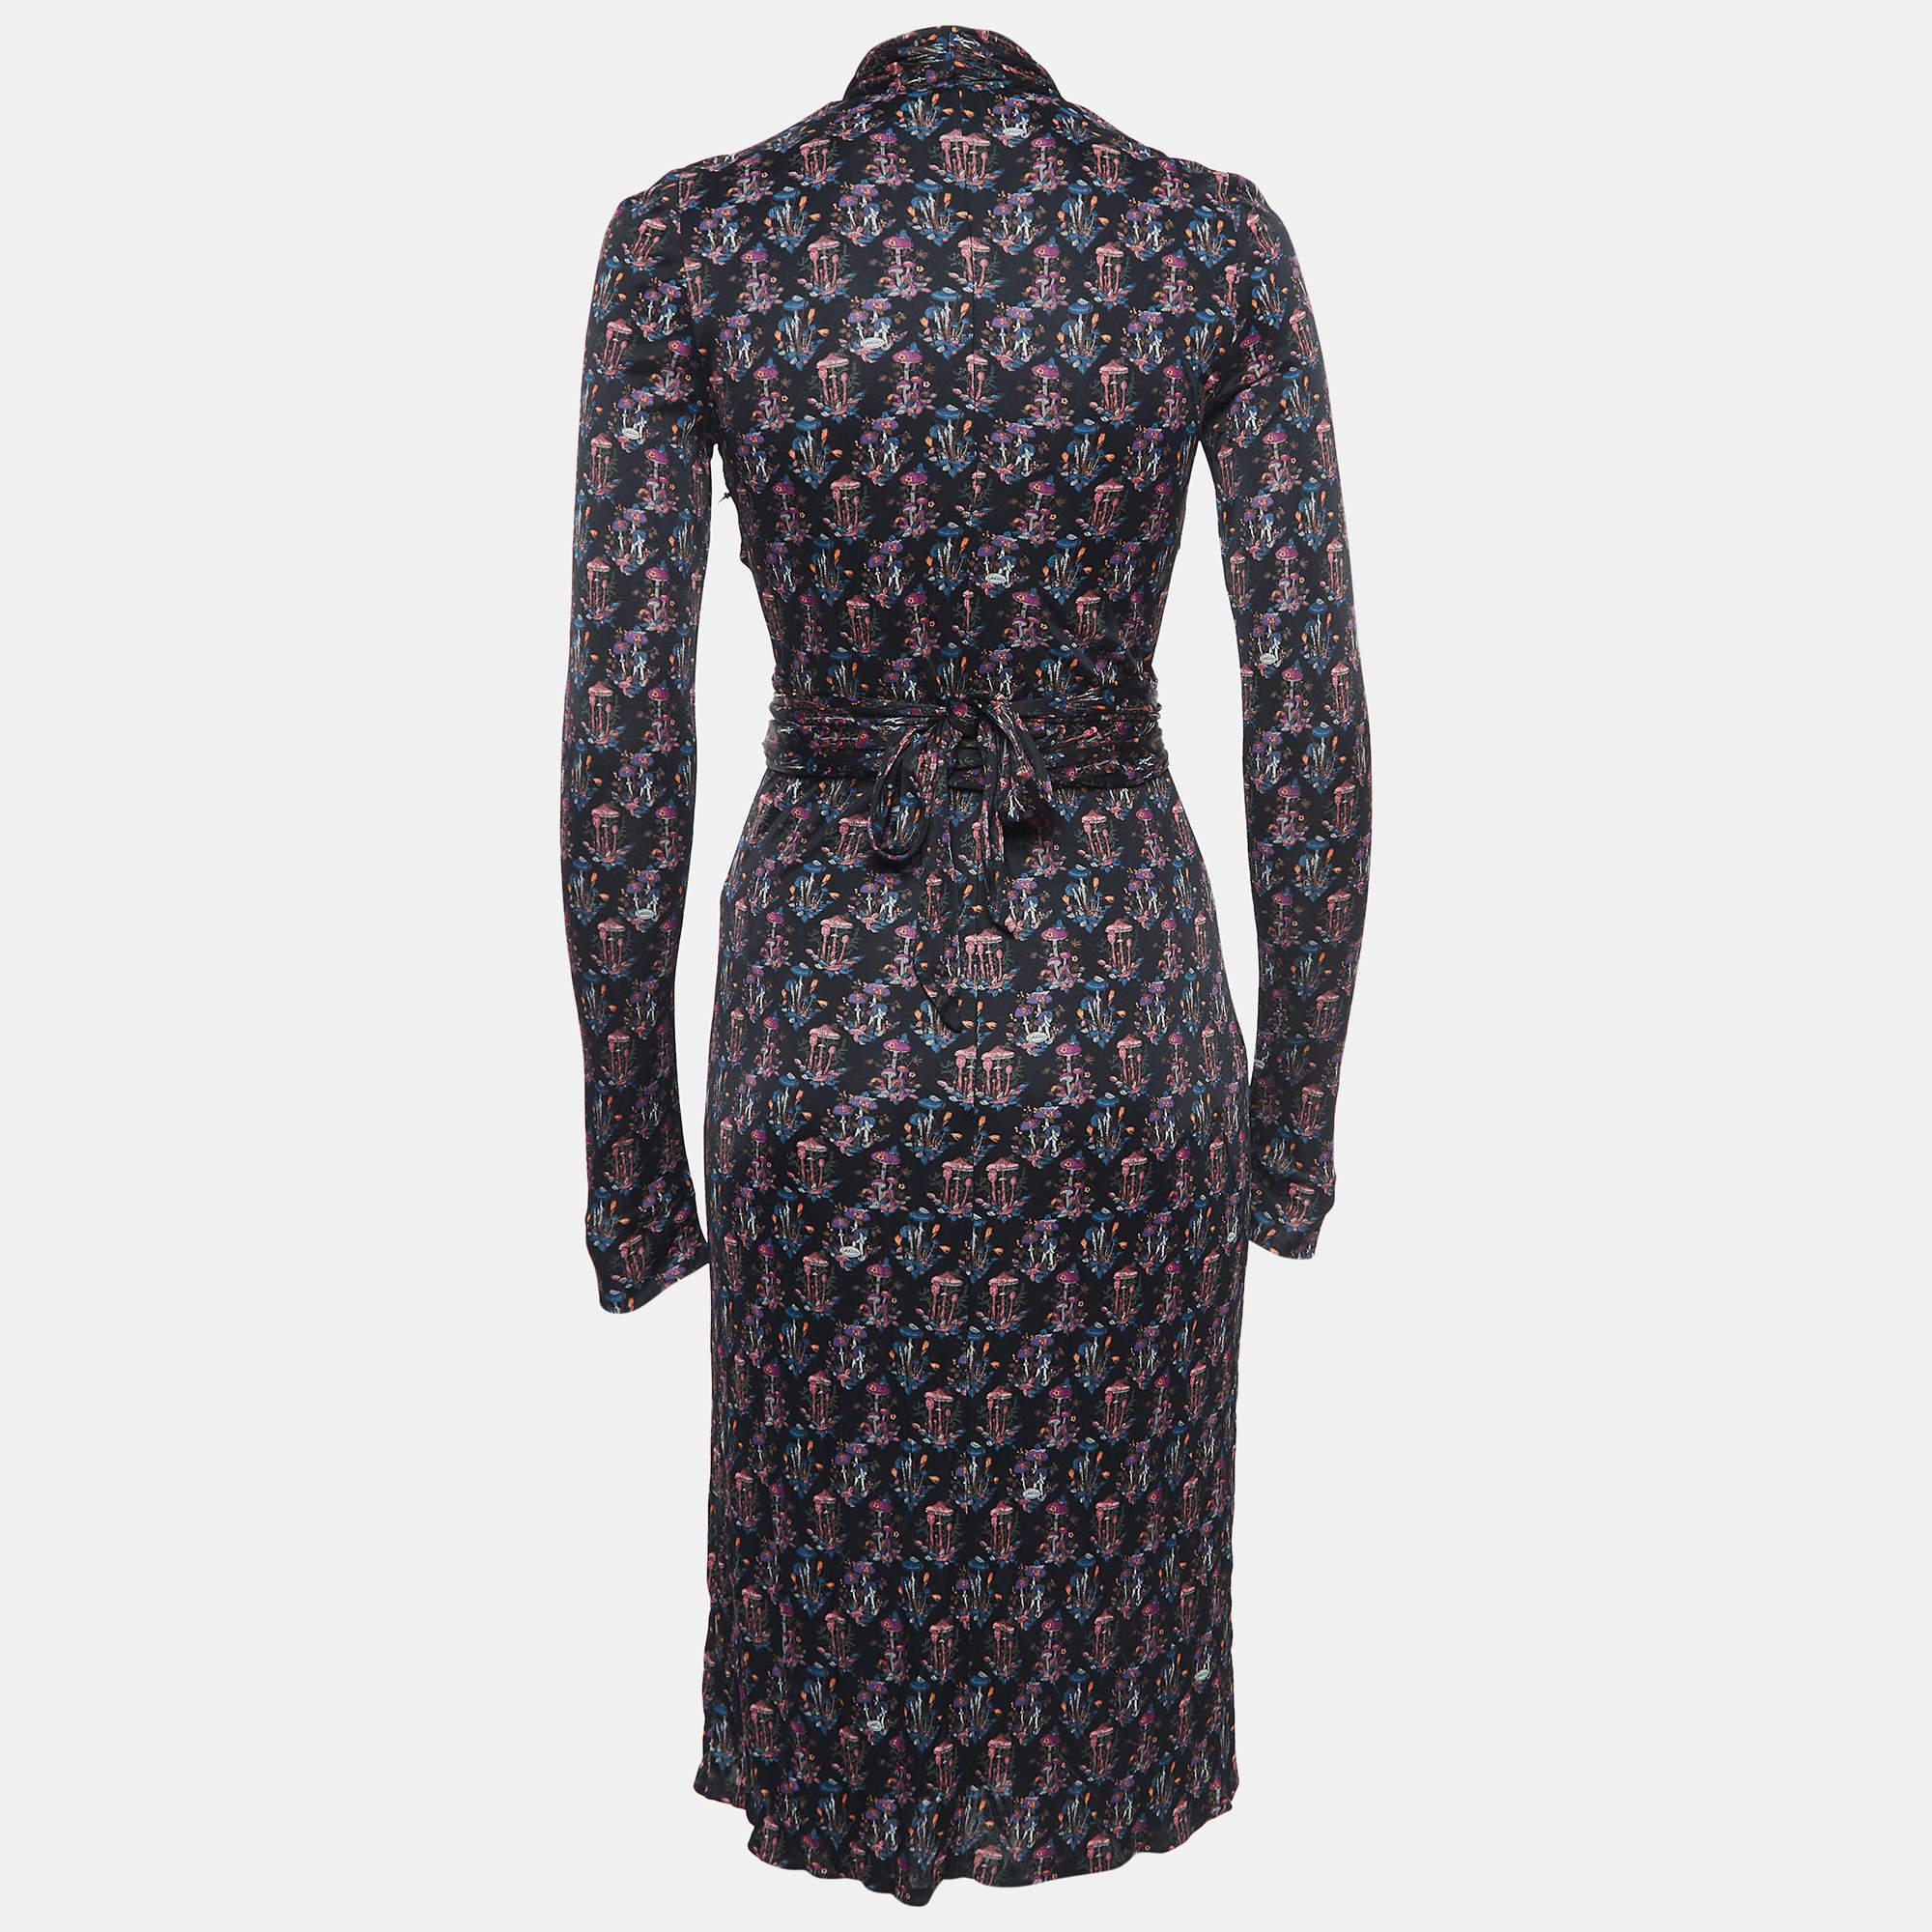 Experience the joy of expert tailoring with this designer dress for women. Meticulously made, it offers a flawless fit and luxe details, ensuring unmatched comfort. Its classic design makes it suitable for any occasion, elevating your style